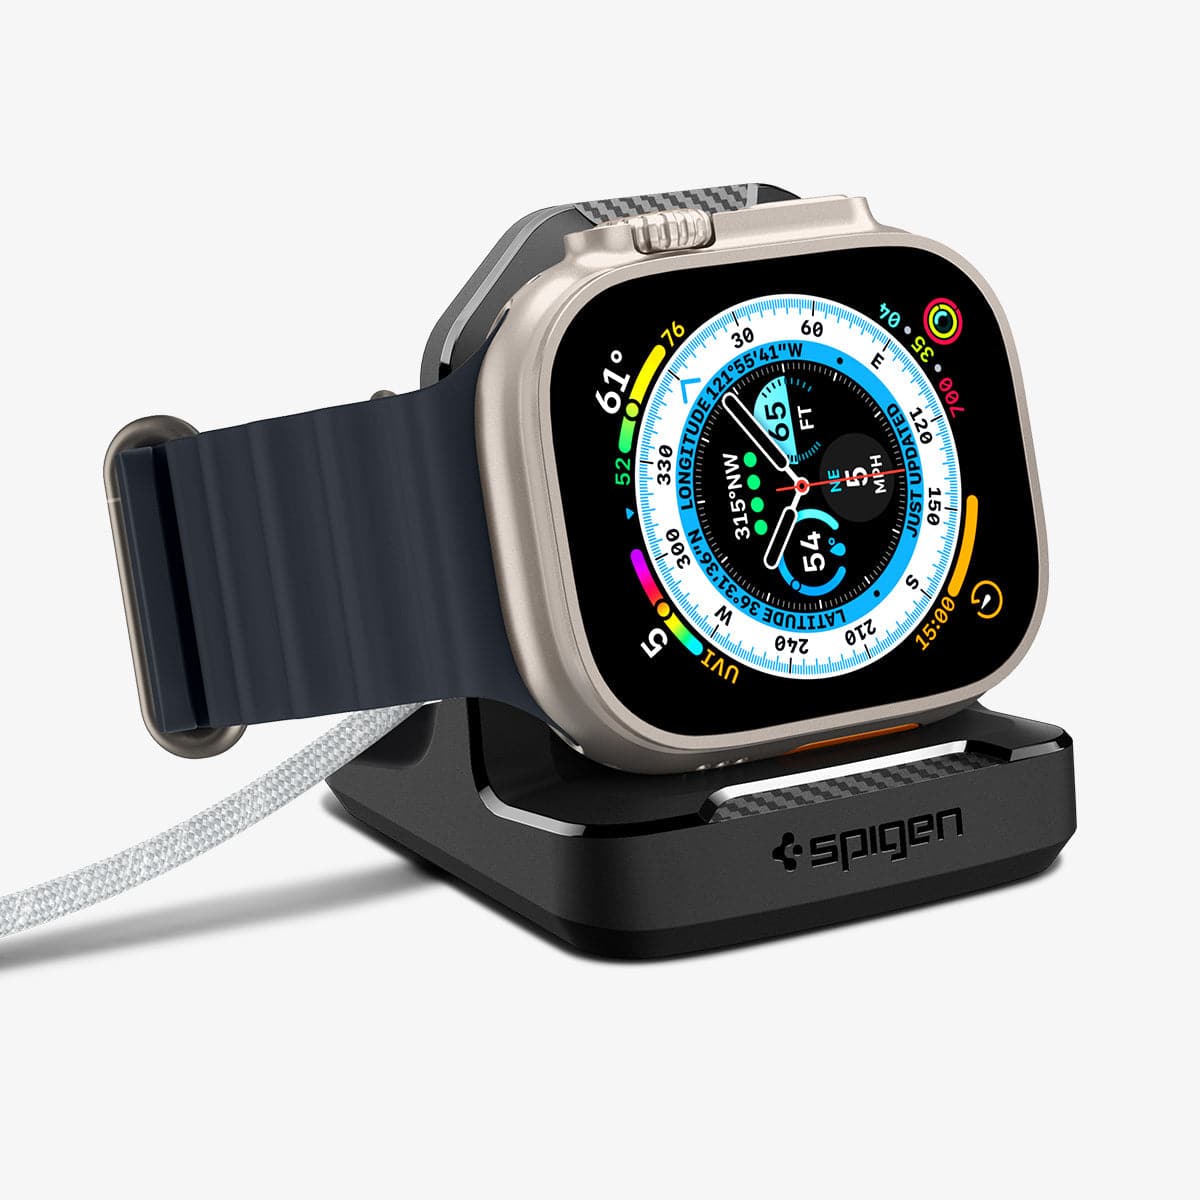 AMP05764 - Apple Watch Rugged Armor Stand in black showing the front and partial side with watch on stand